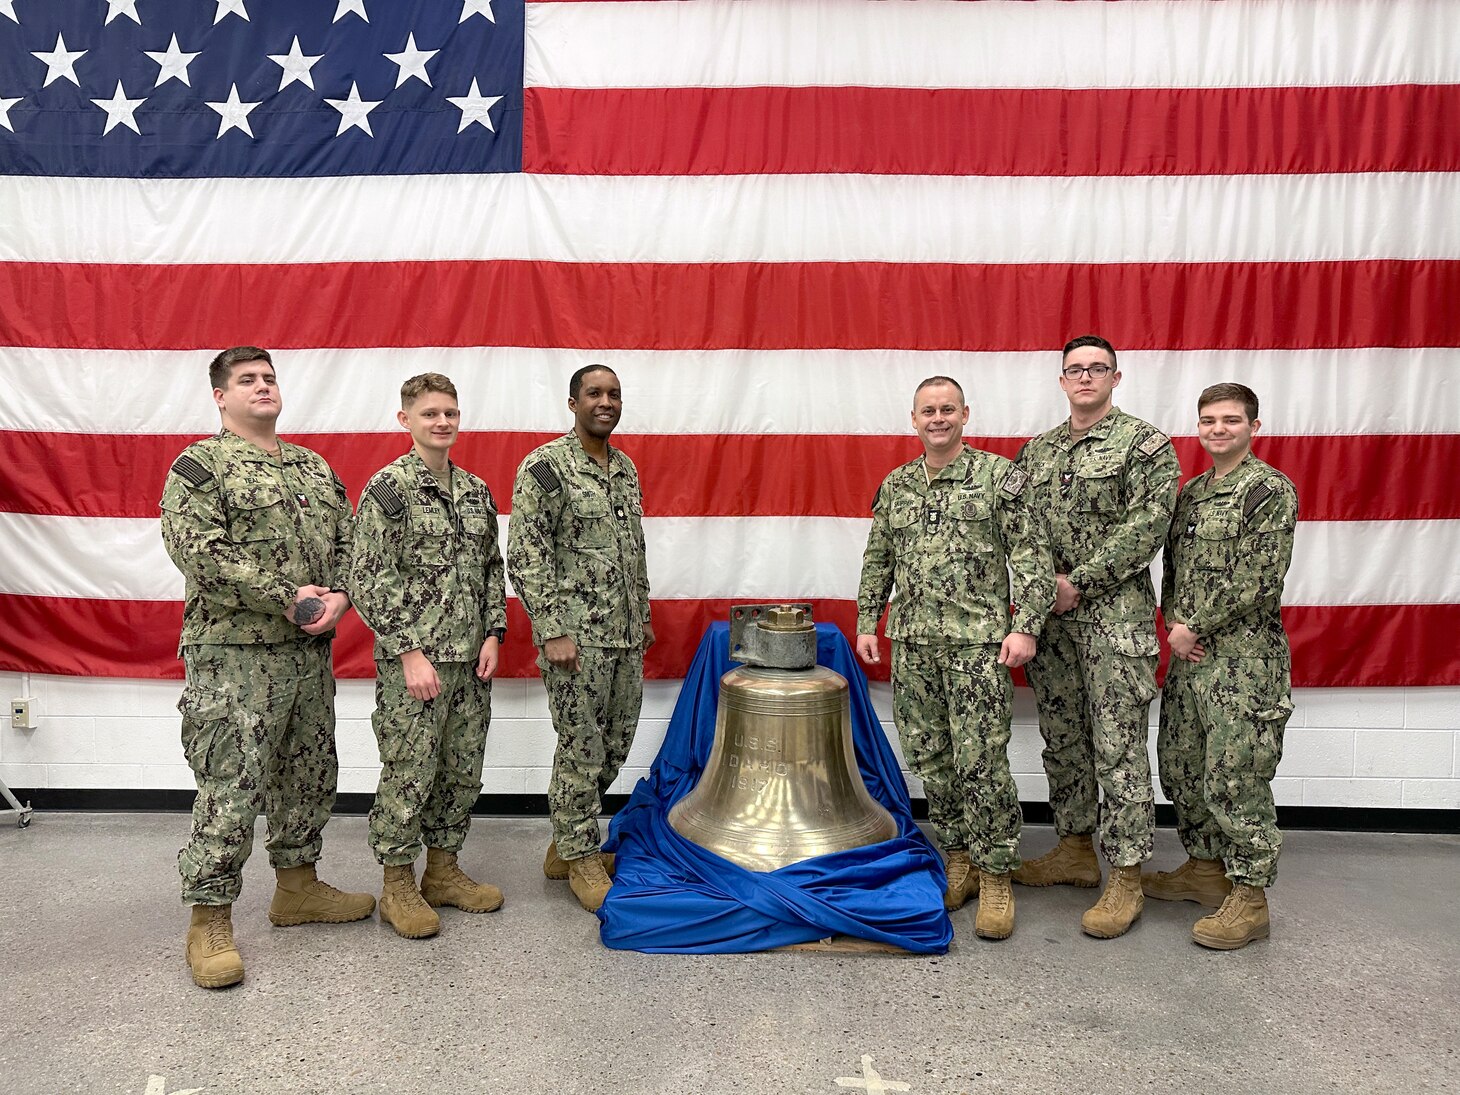 Crewmembers of the future USS Idaho (SSN 799) pose in front of a ship’s bell from the WWII Battleship (BB) 42 USS Idaho during a tour of the Navy Reserve Center in Boise, Idaho, Jan. 26.